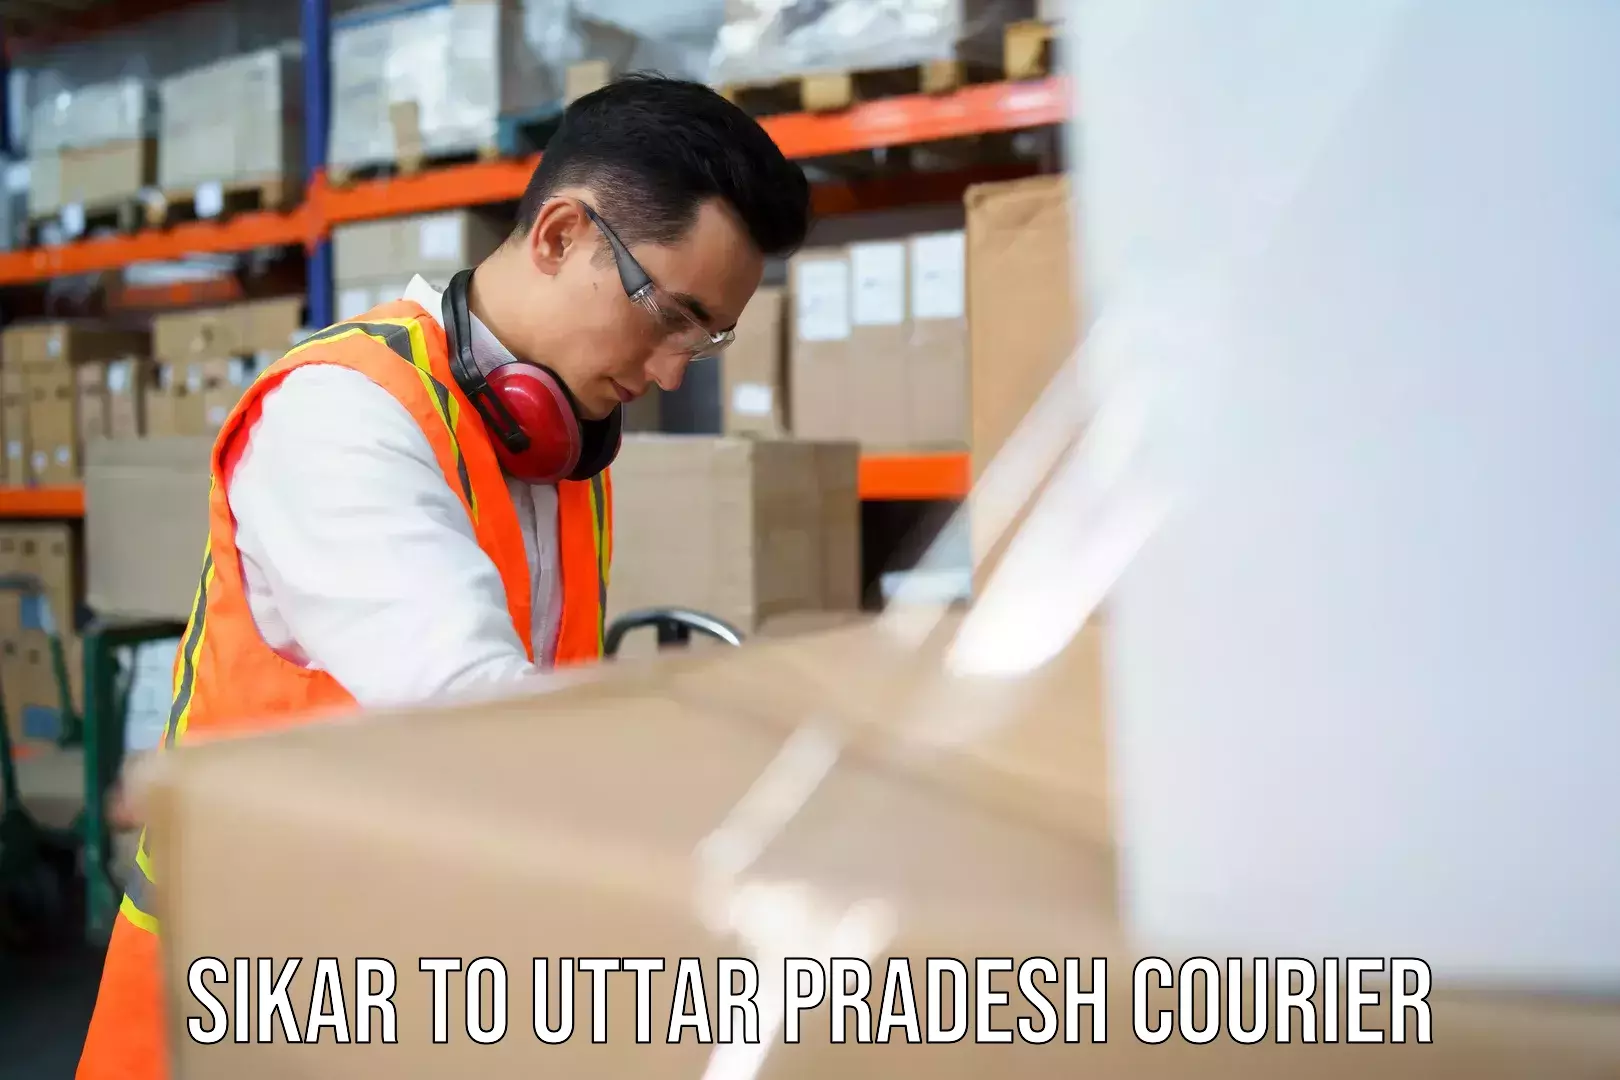 On-call courier service Sikar to Vrindavan